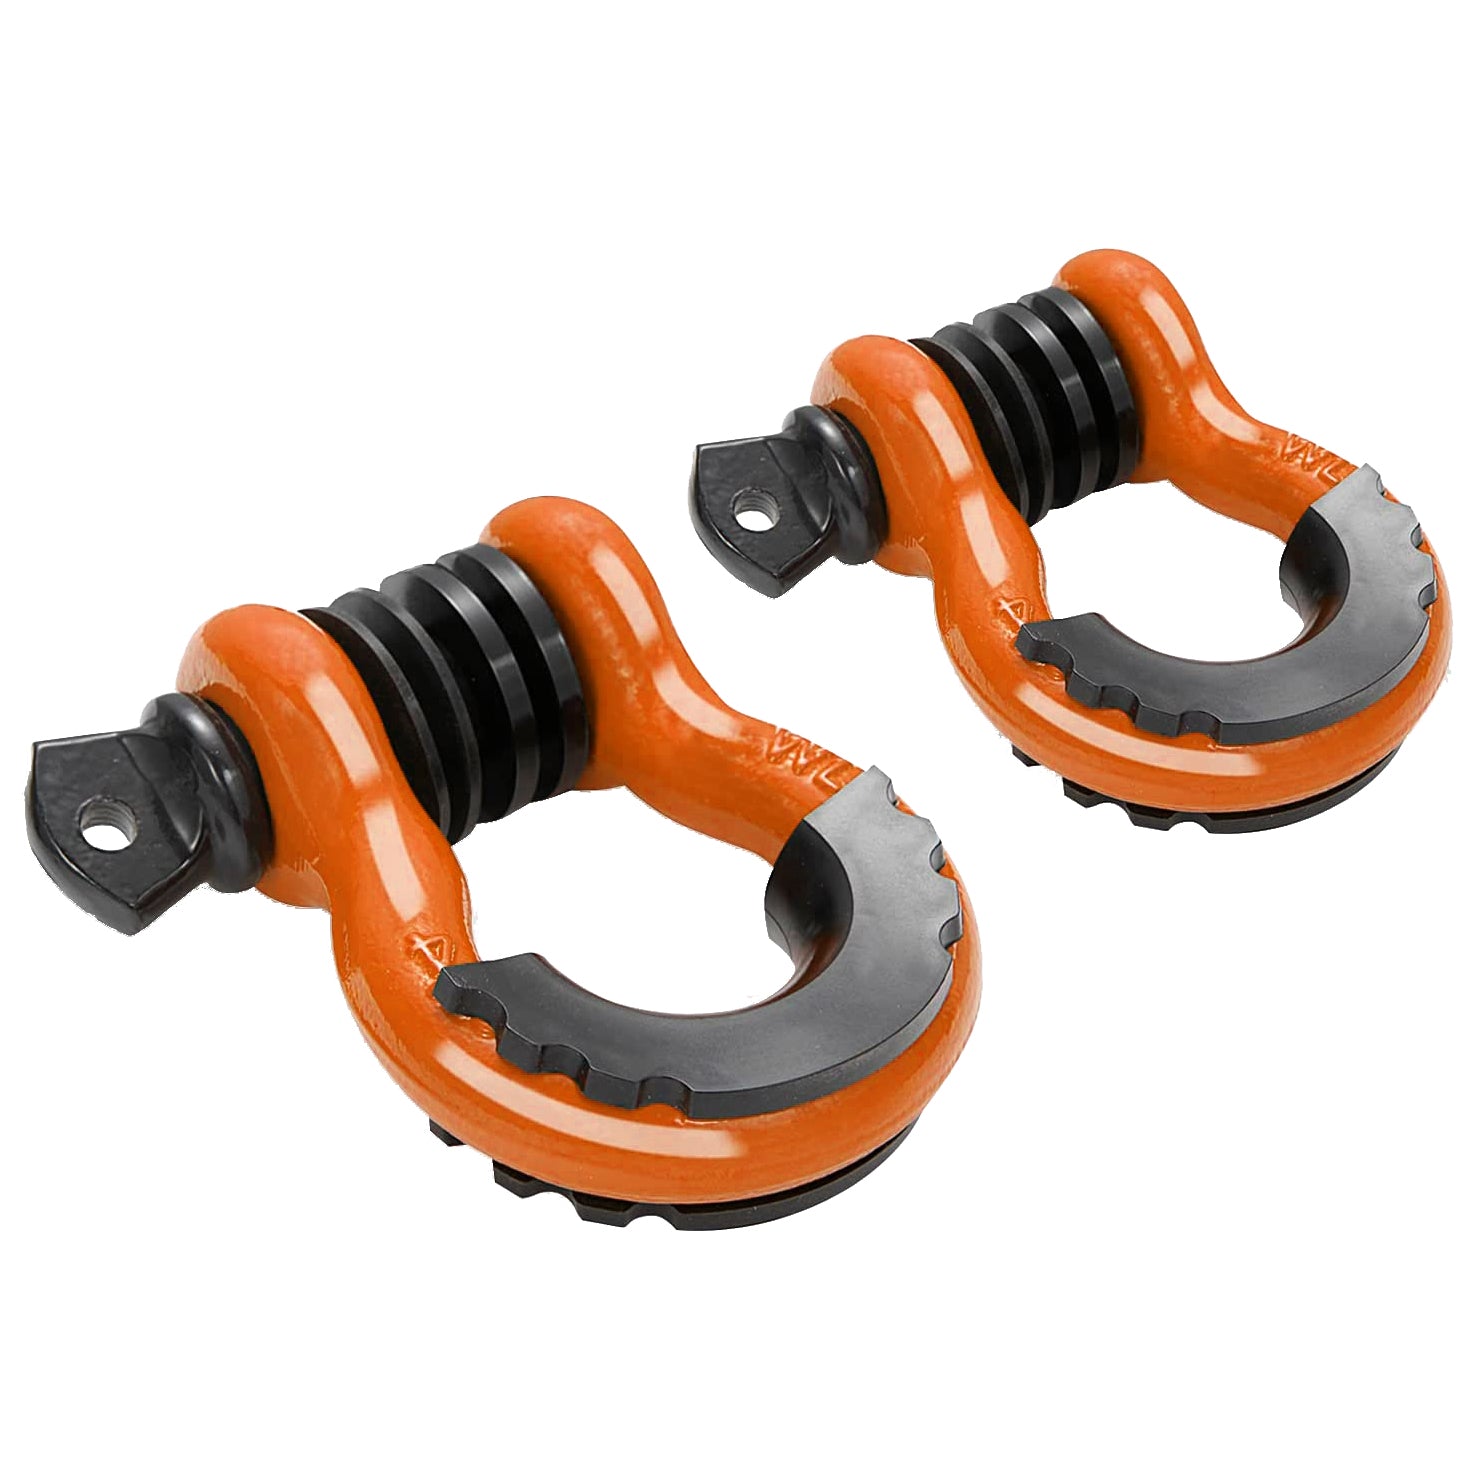 OPENROAD 3/4" D-Ring Shackle 4.75 Ton (9500 Lbs) Capacity with Isolators & Washer Kit for Jeep Truck Vehicle  openroad4wd.com orange  